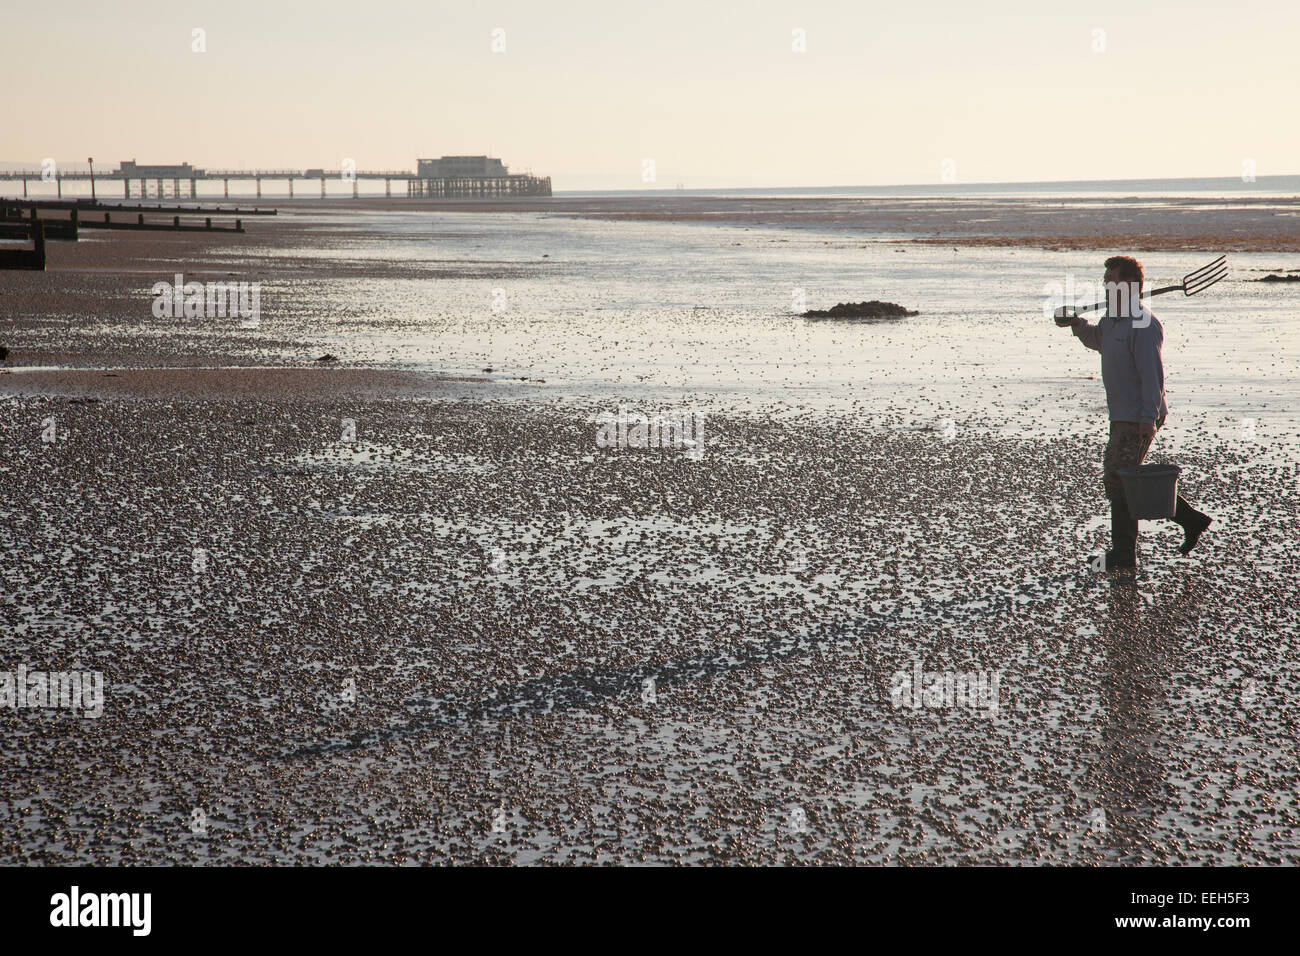 Bait digger walking on beach à Worthing, West Sussex, Angleterre. Banque D'Images